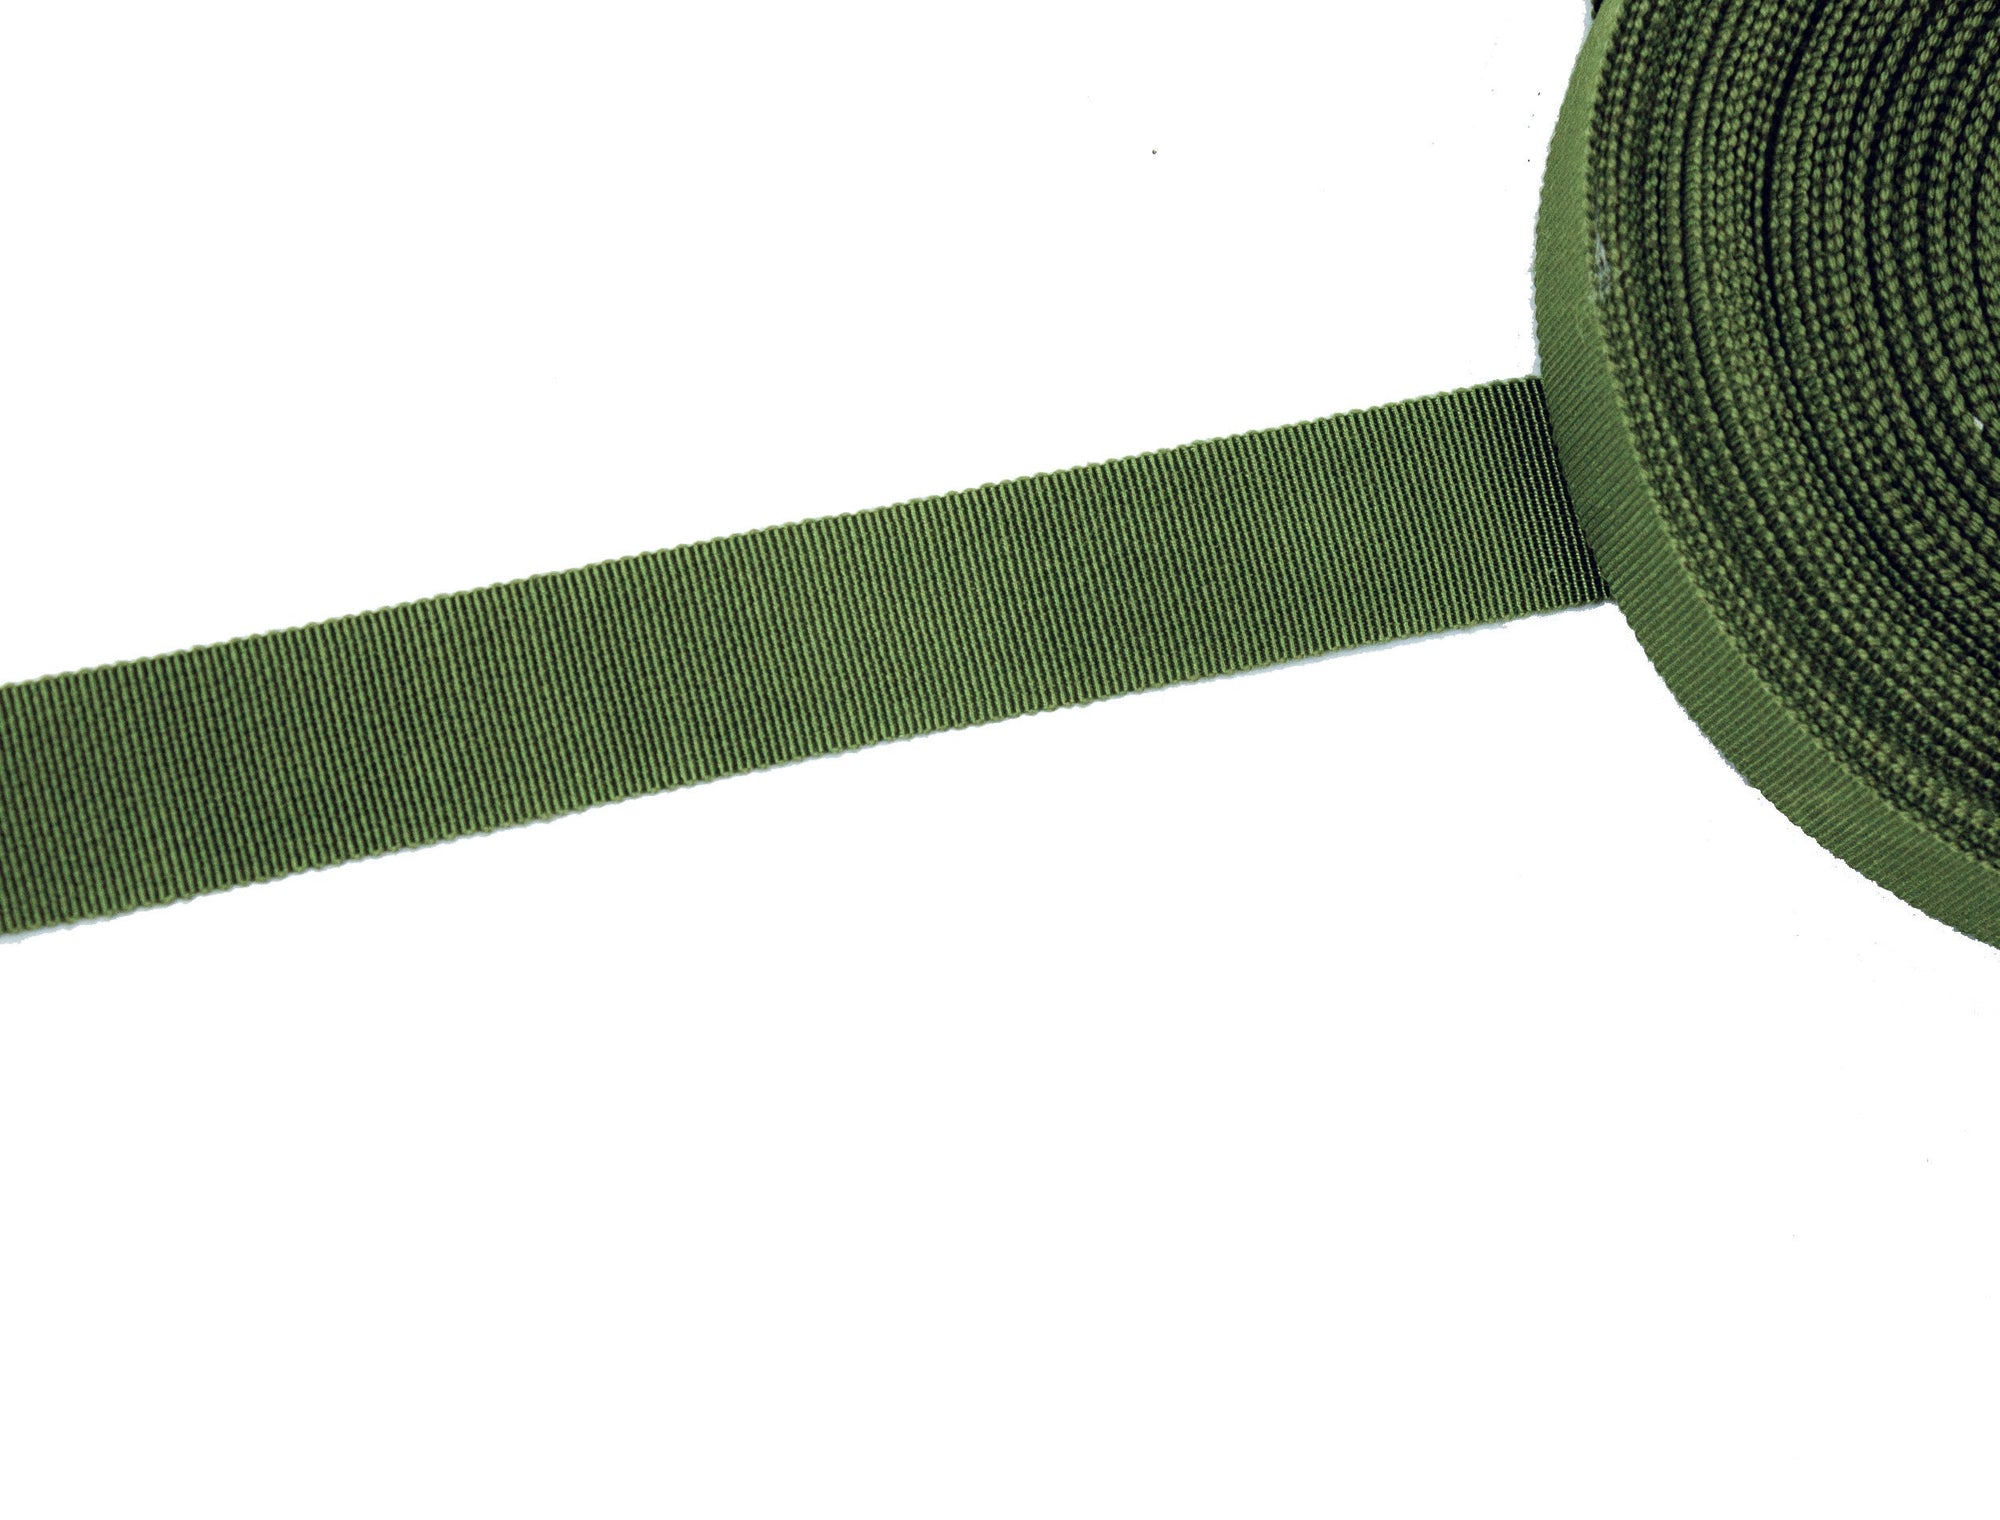 Vintage Petersham Ribbon Olive Green Measures 23 mm Wide - Sold by the Yard